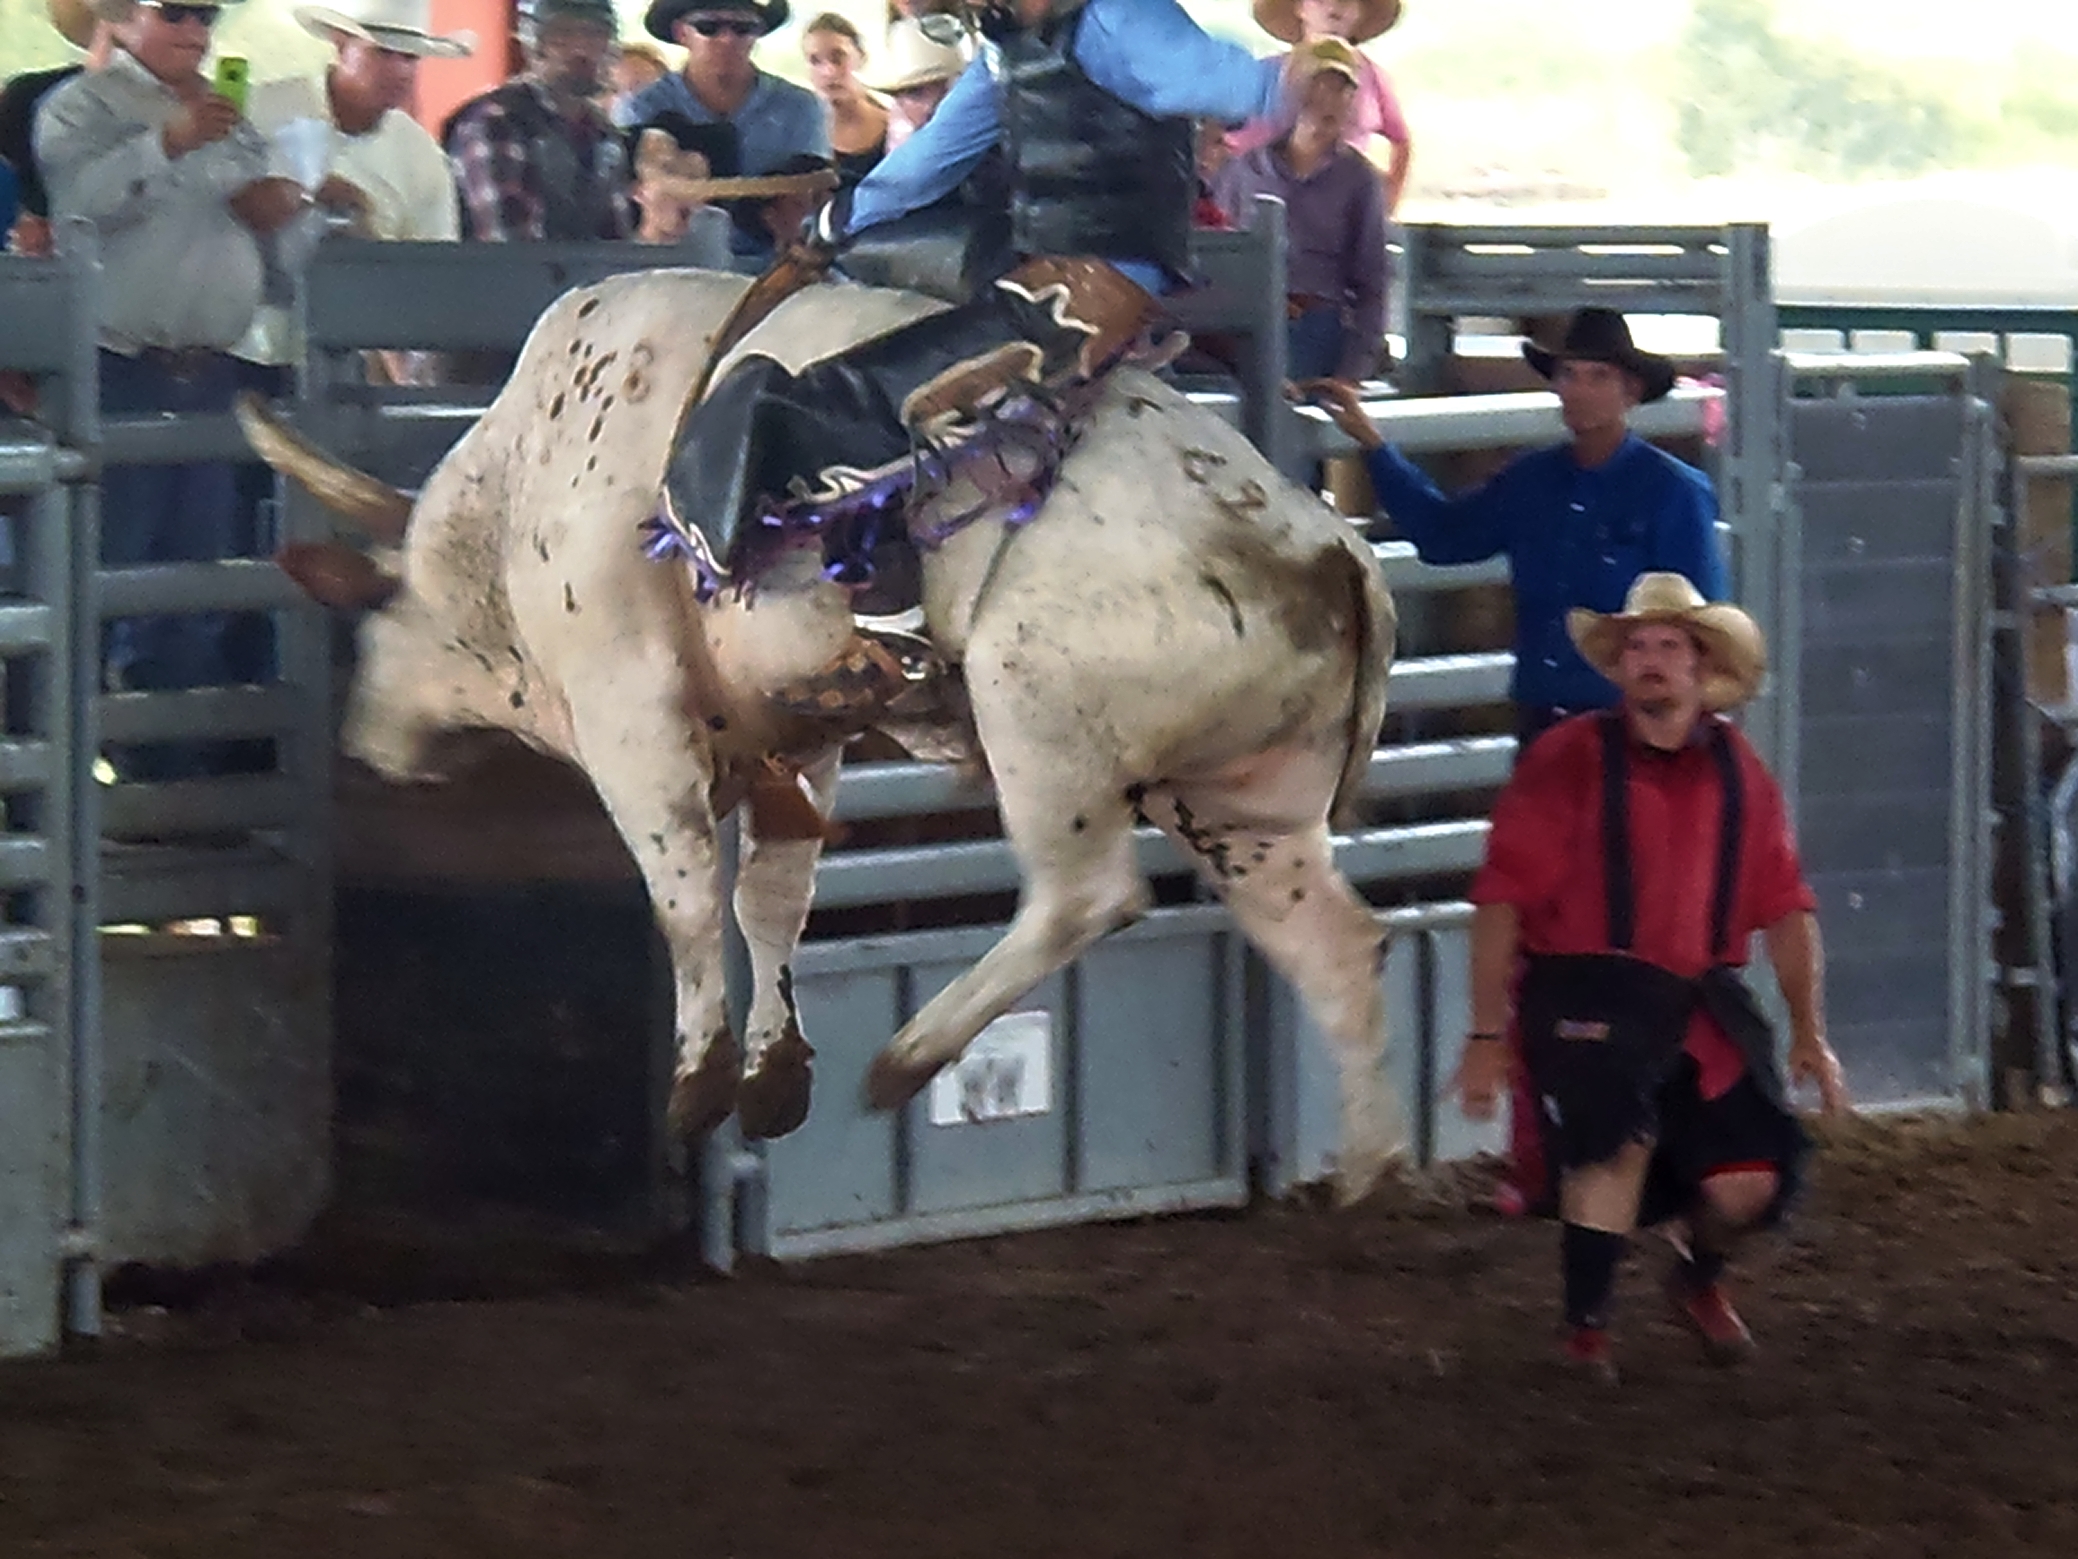 a cow is jumping in the air as it goes over an obstacle